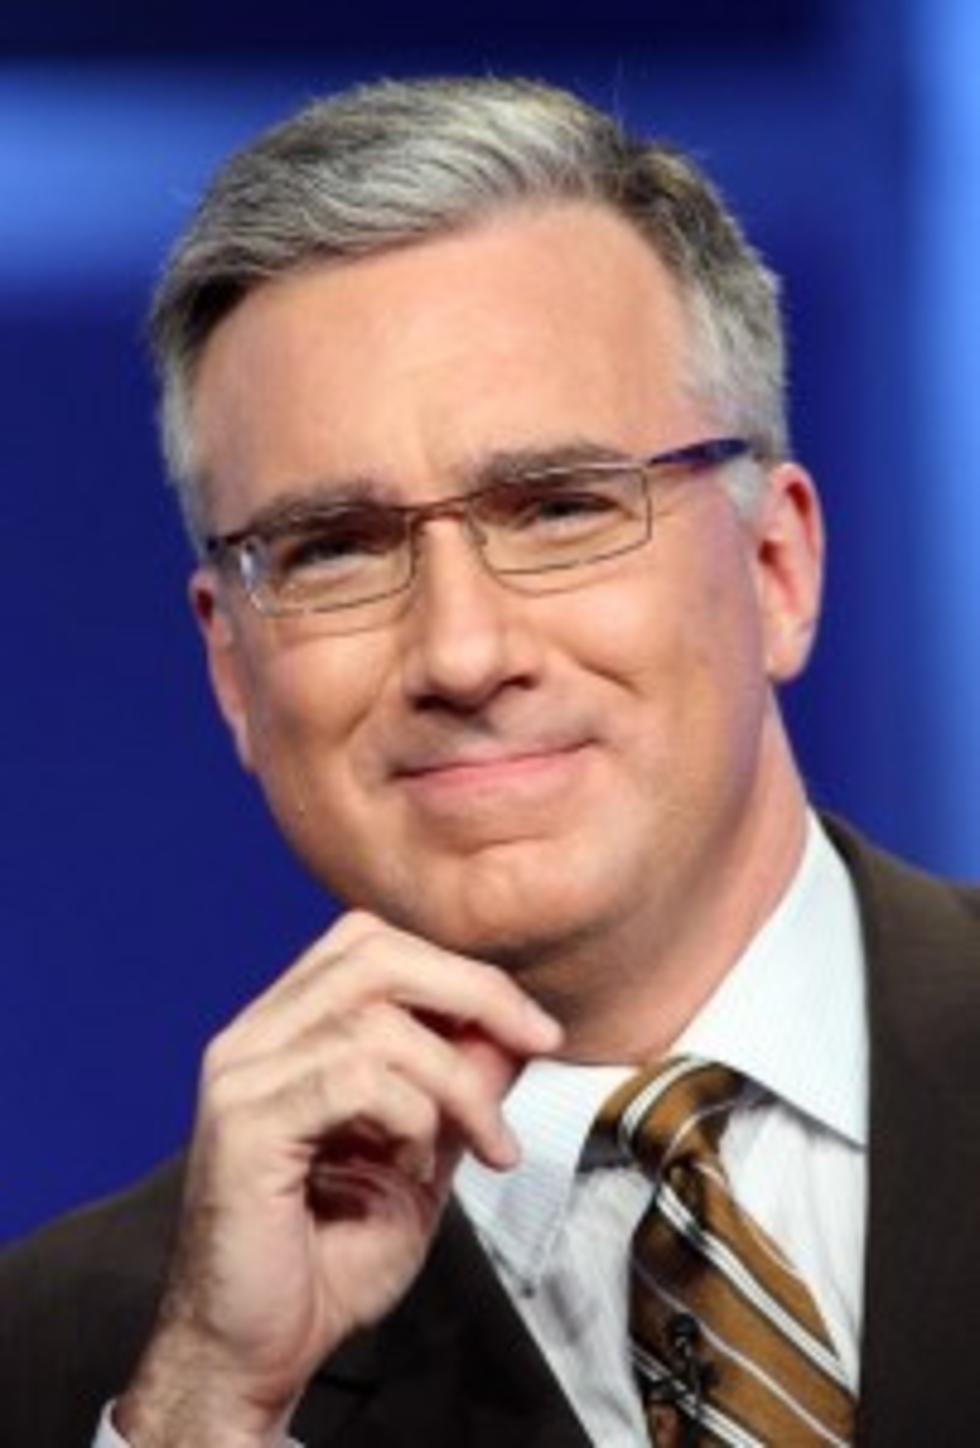 Keith Olbermann Abruptly Signs Off